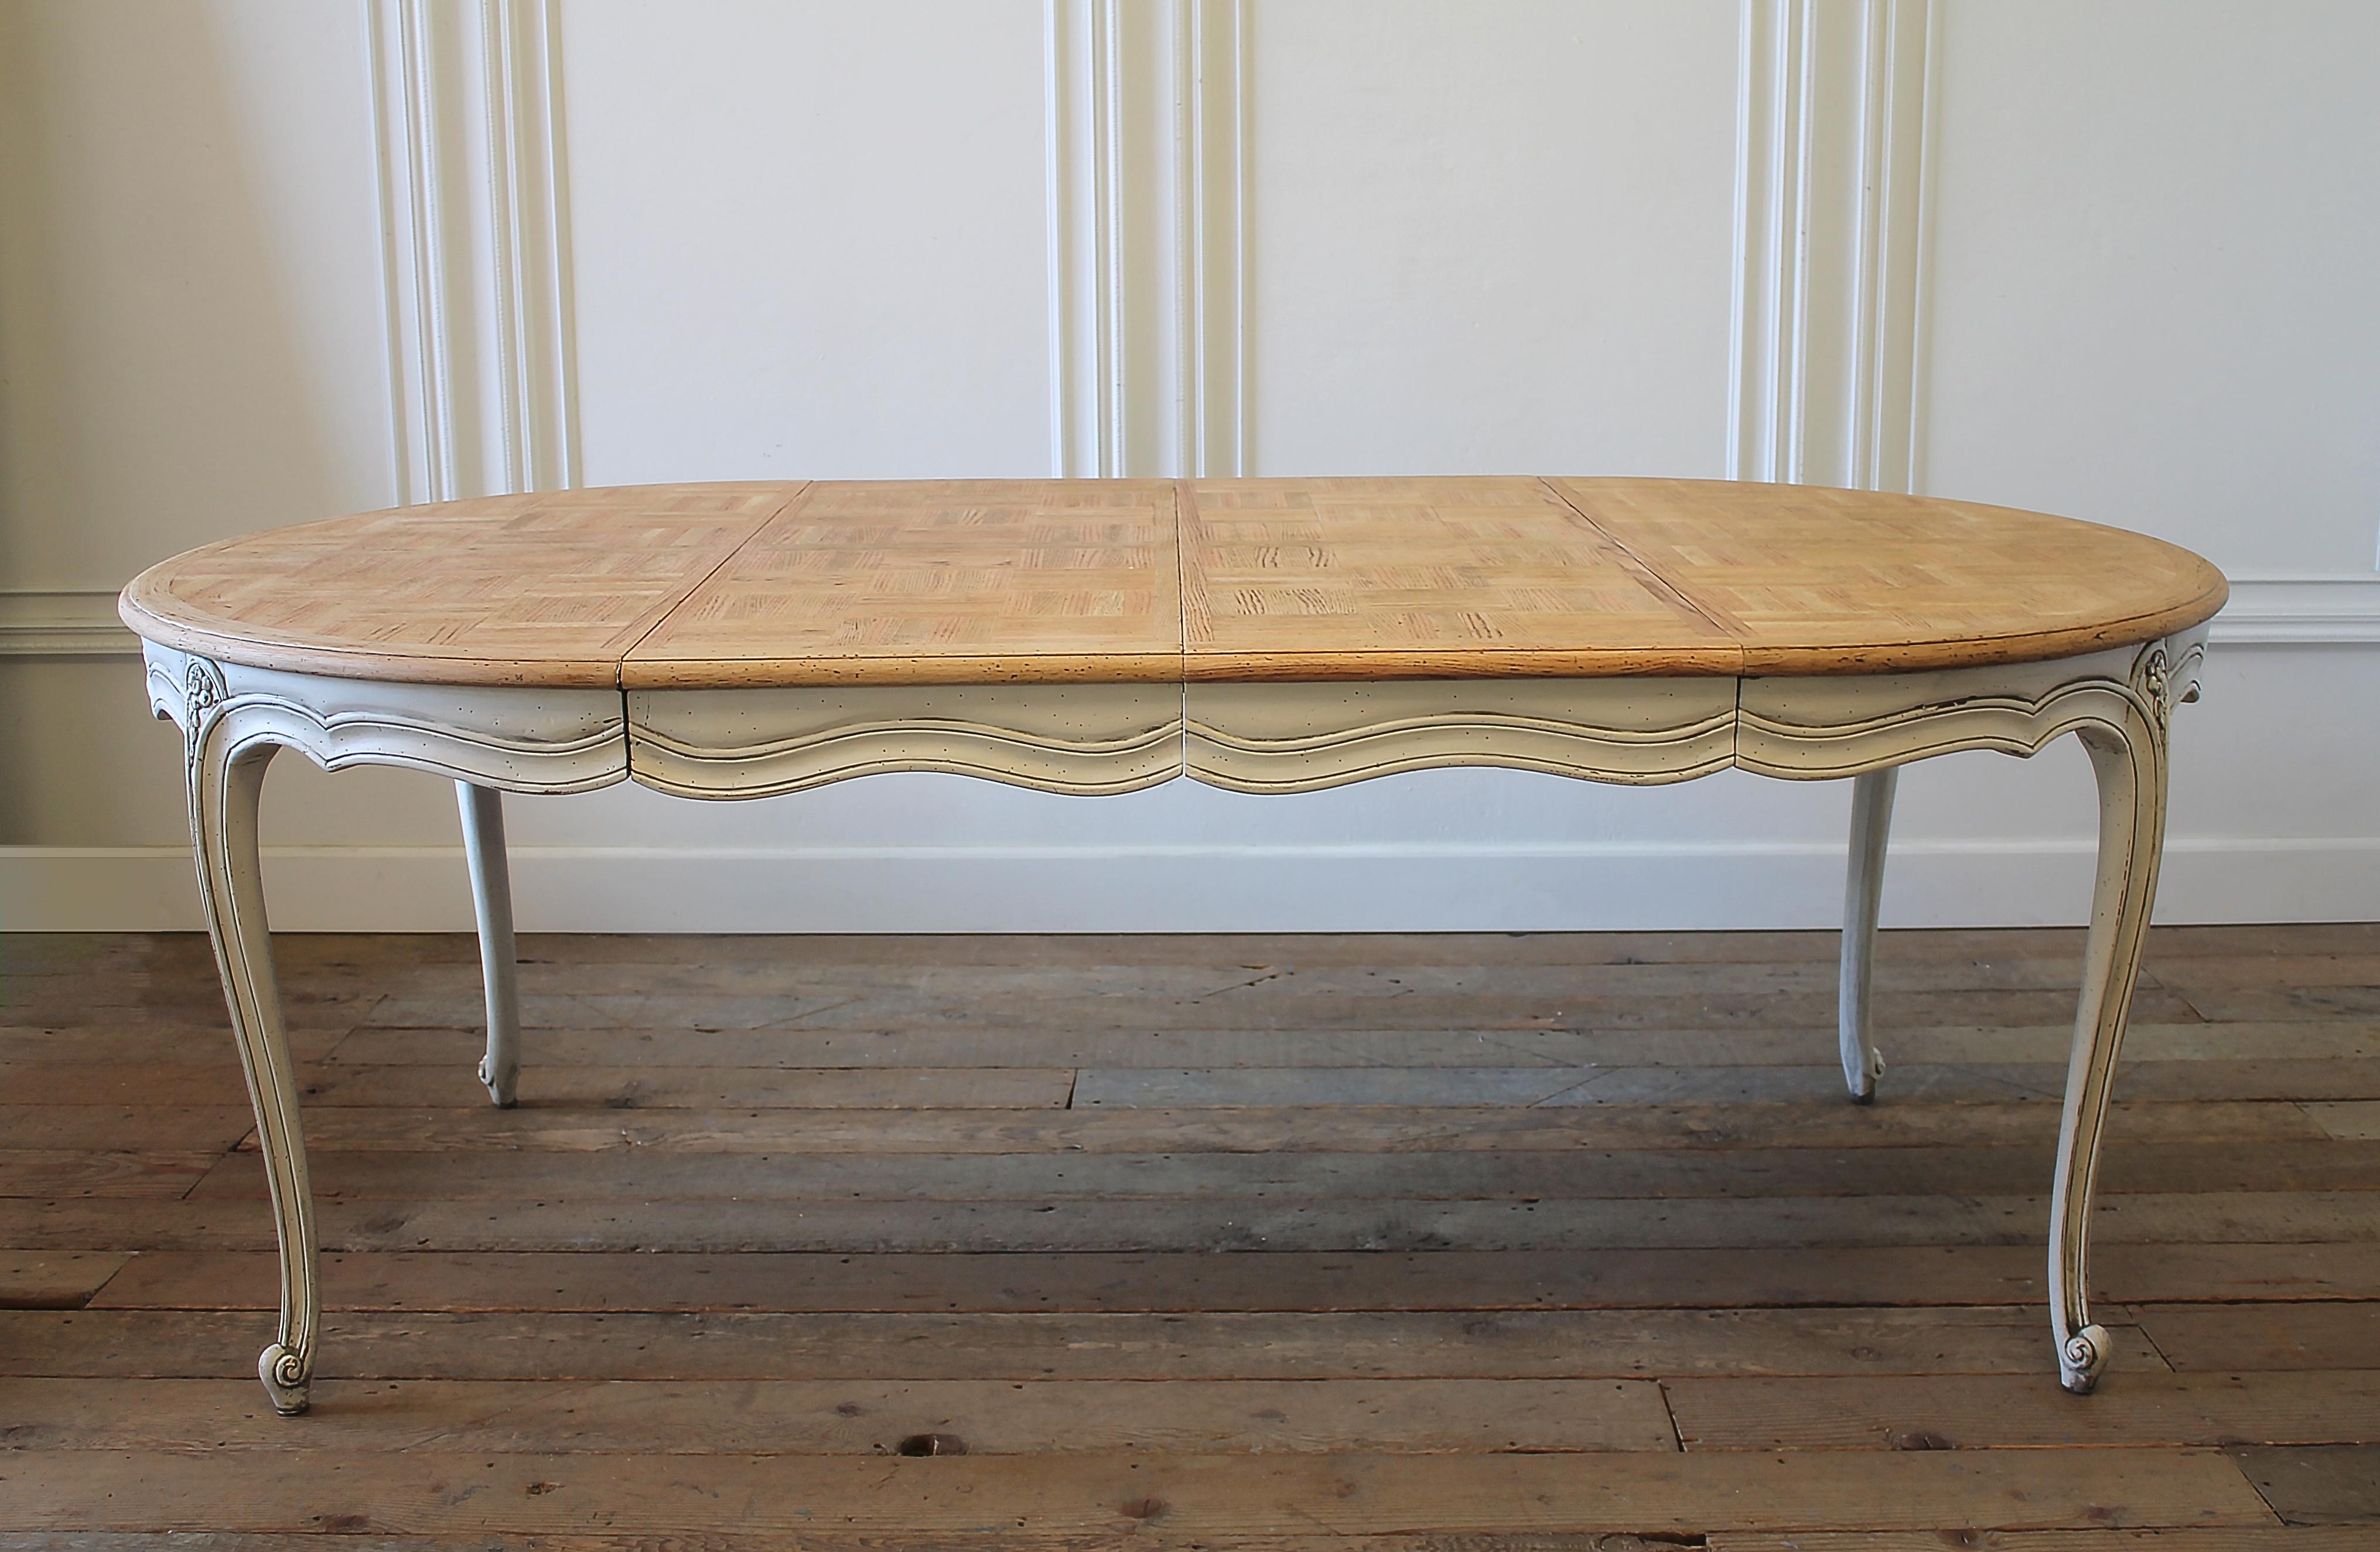 20th century French Provincial parquetry dining table.
Beautiful French Provincial dining table with natural wood parquetry top. Table base has been painted in a soft oyster white finish, with subtle distressed edges, and finished with an antique